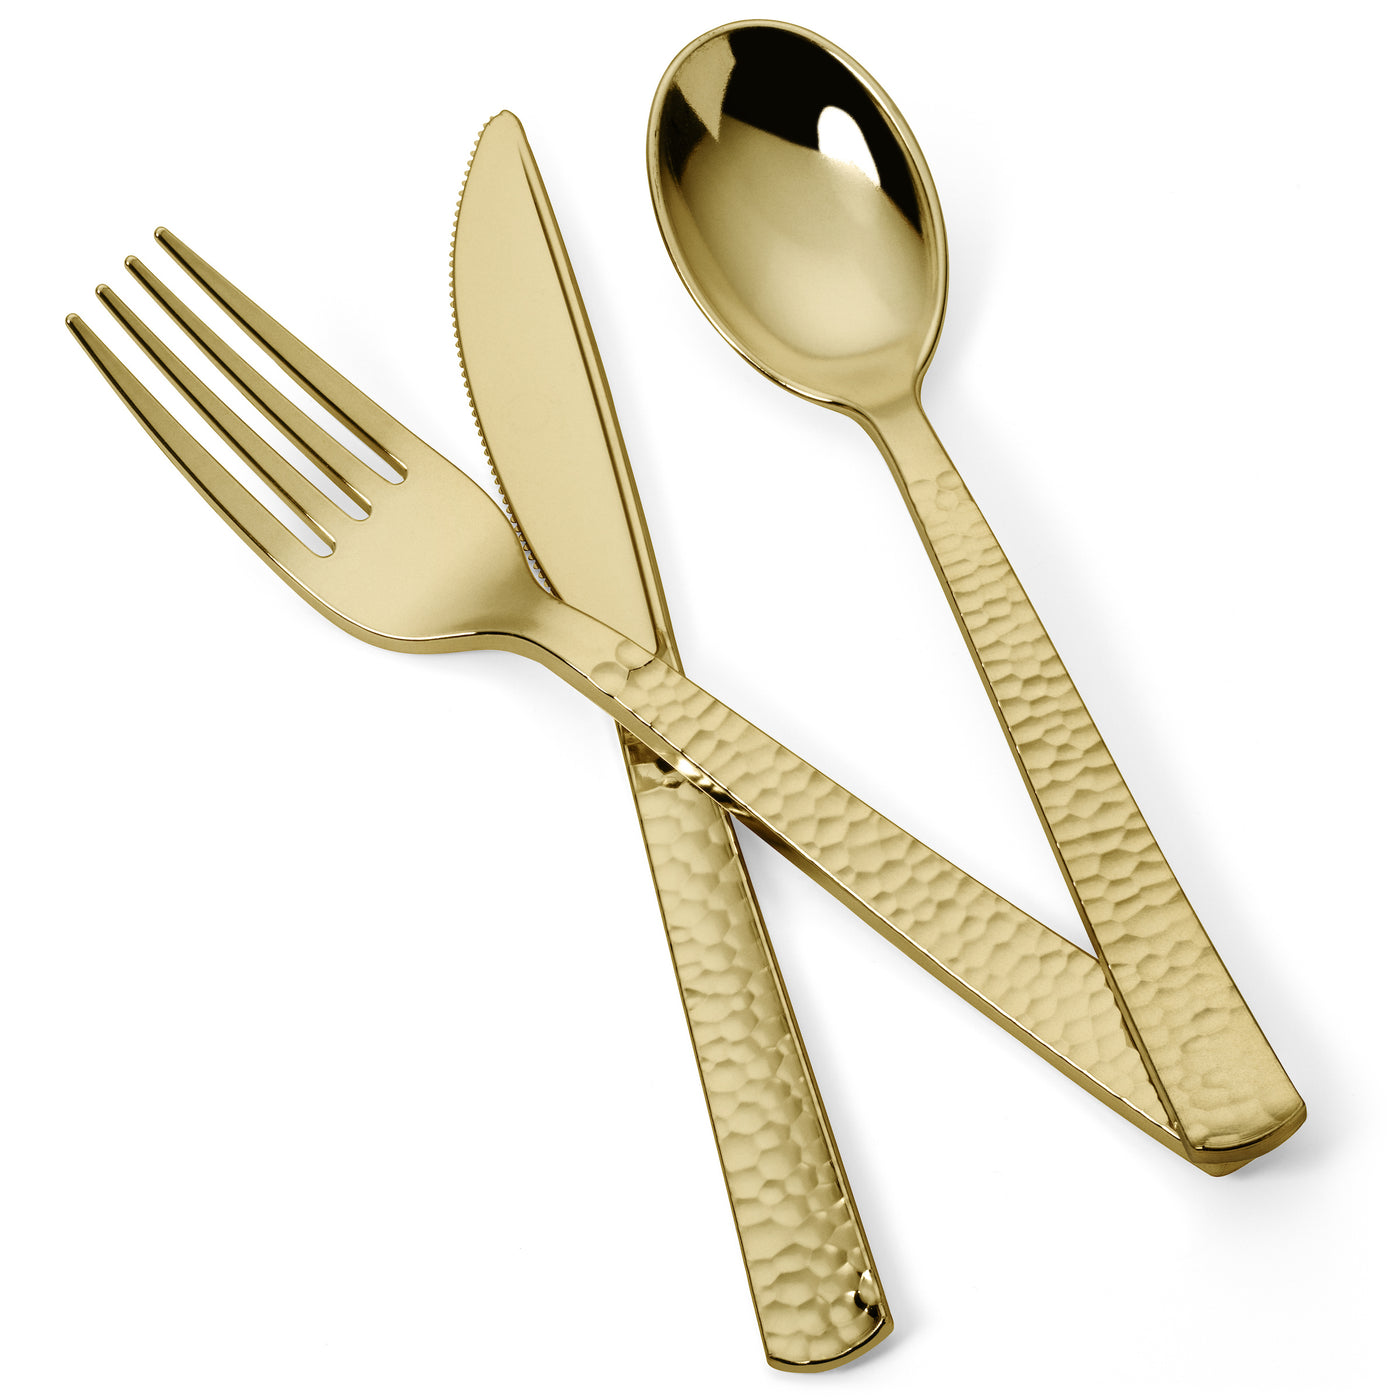 150 Pieces Gold Plastic Cutlery Set - Gold Metallic Plastic Silverware - Hammered Finish -50 Set - Perfect Settings Tableware